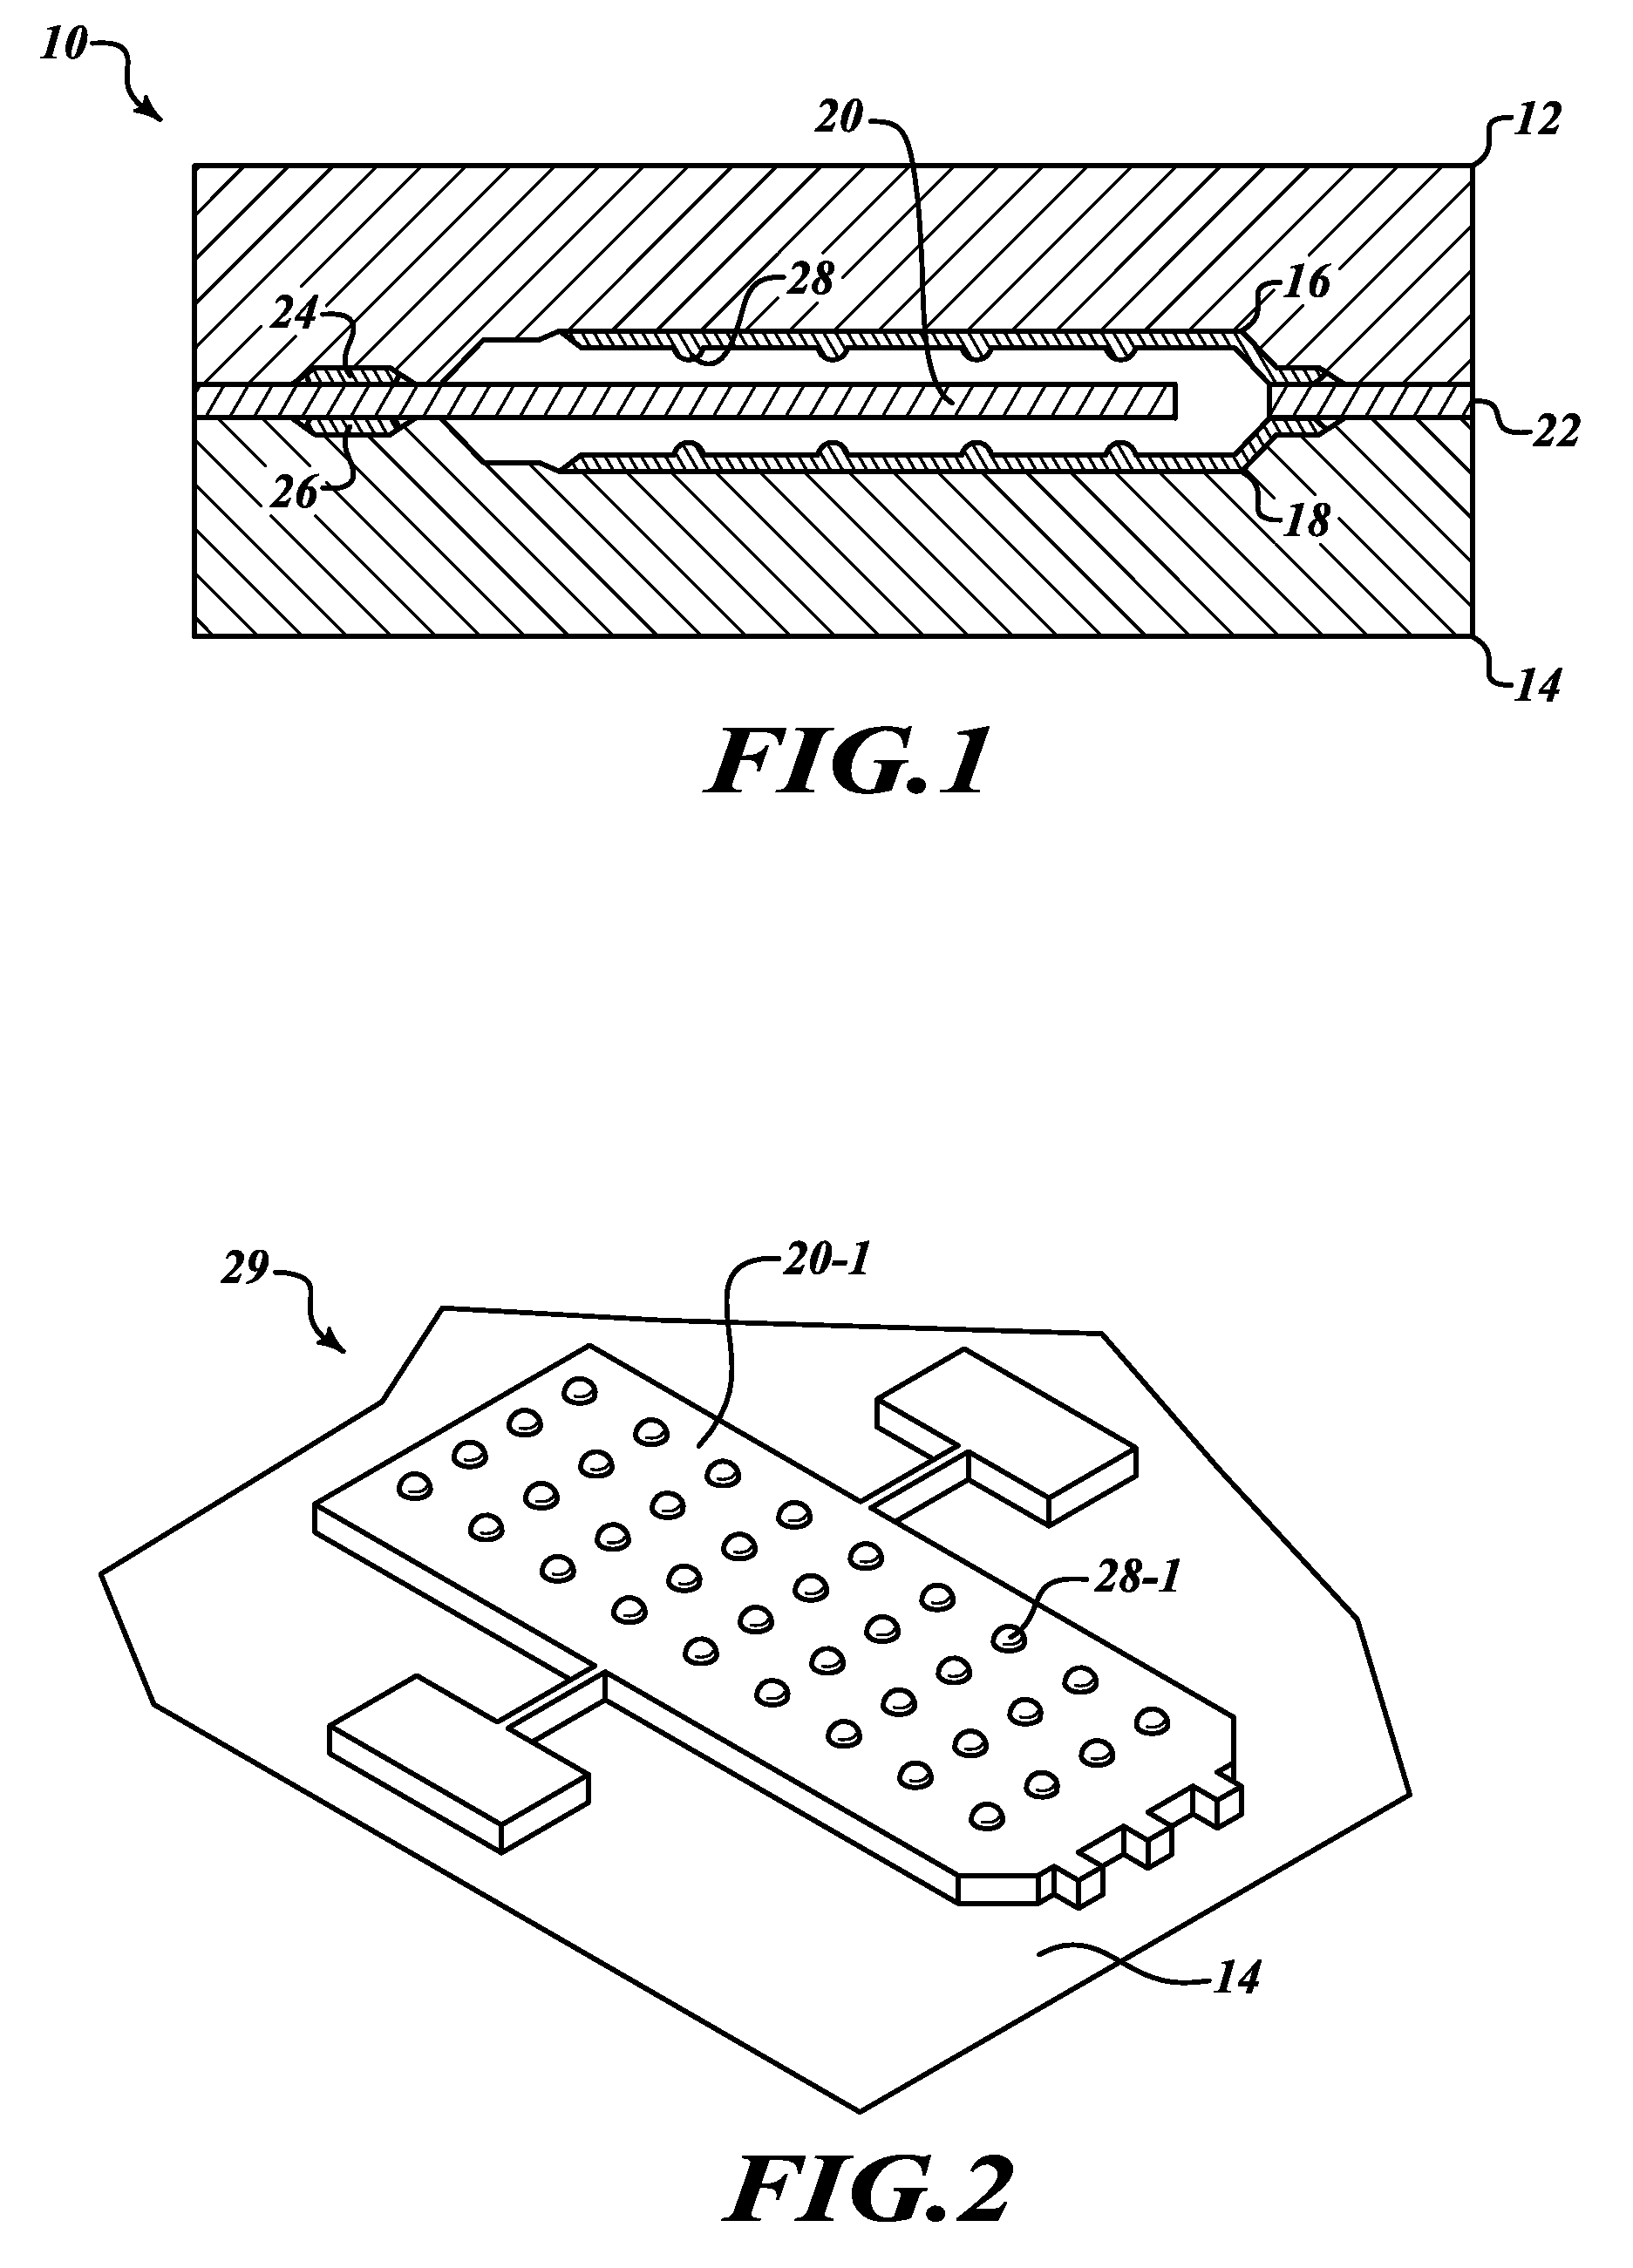 Systems and methods for stiction reduction in MEMS devices